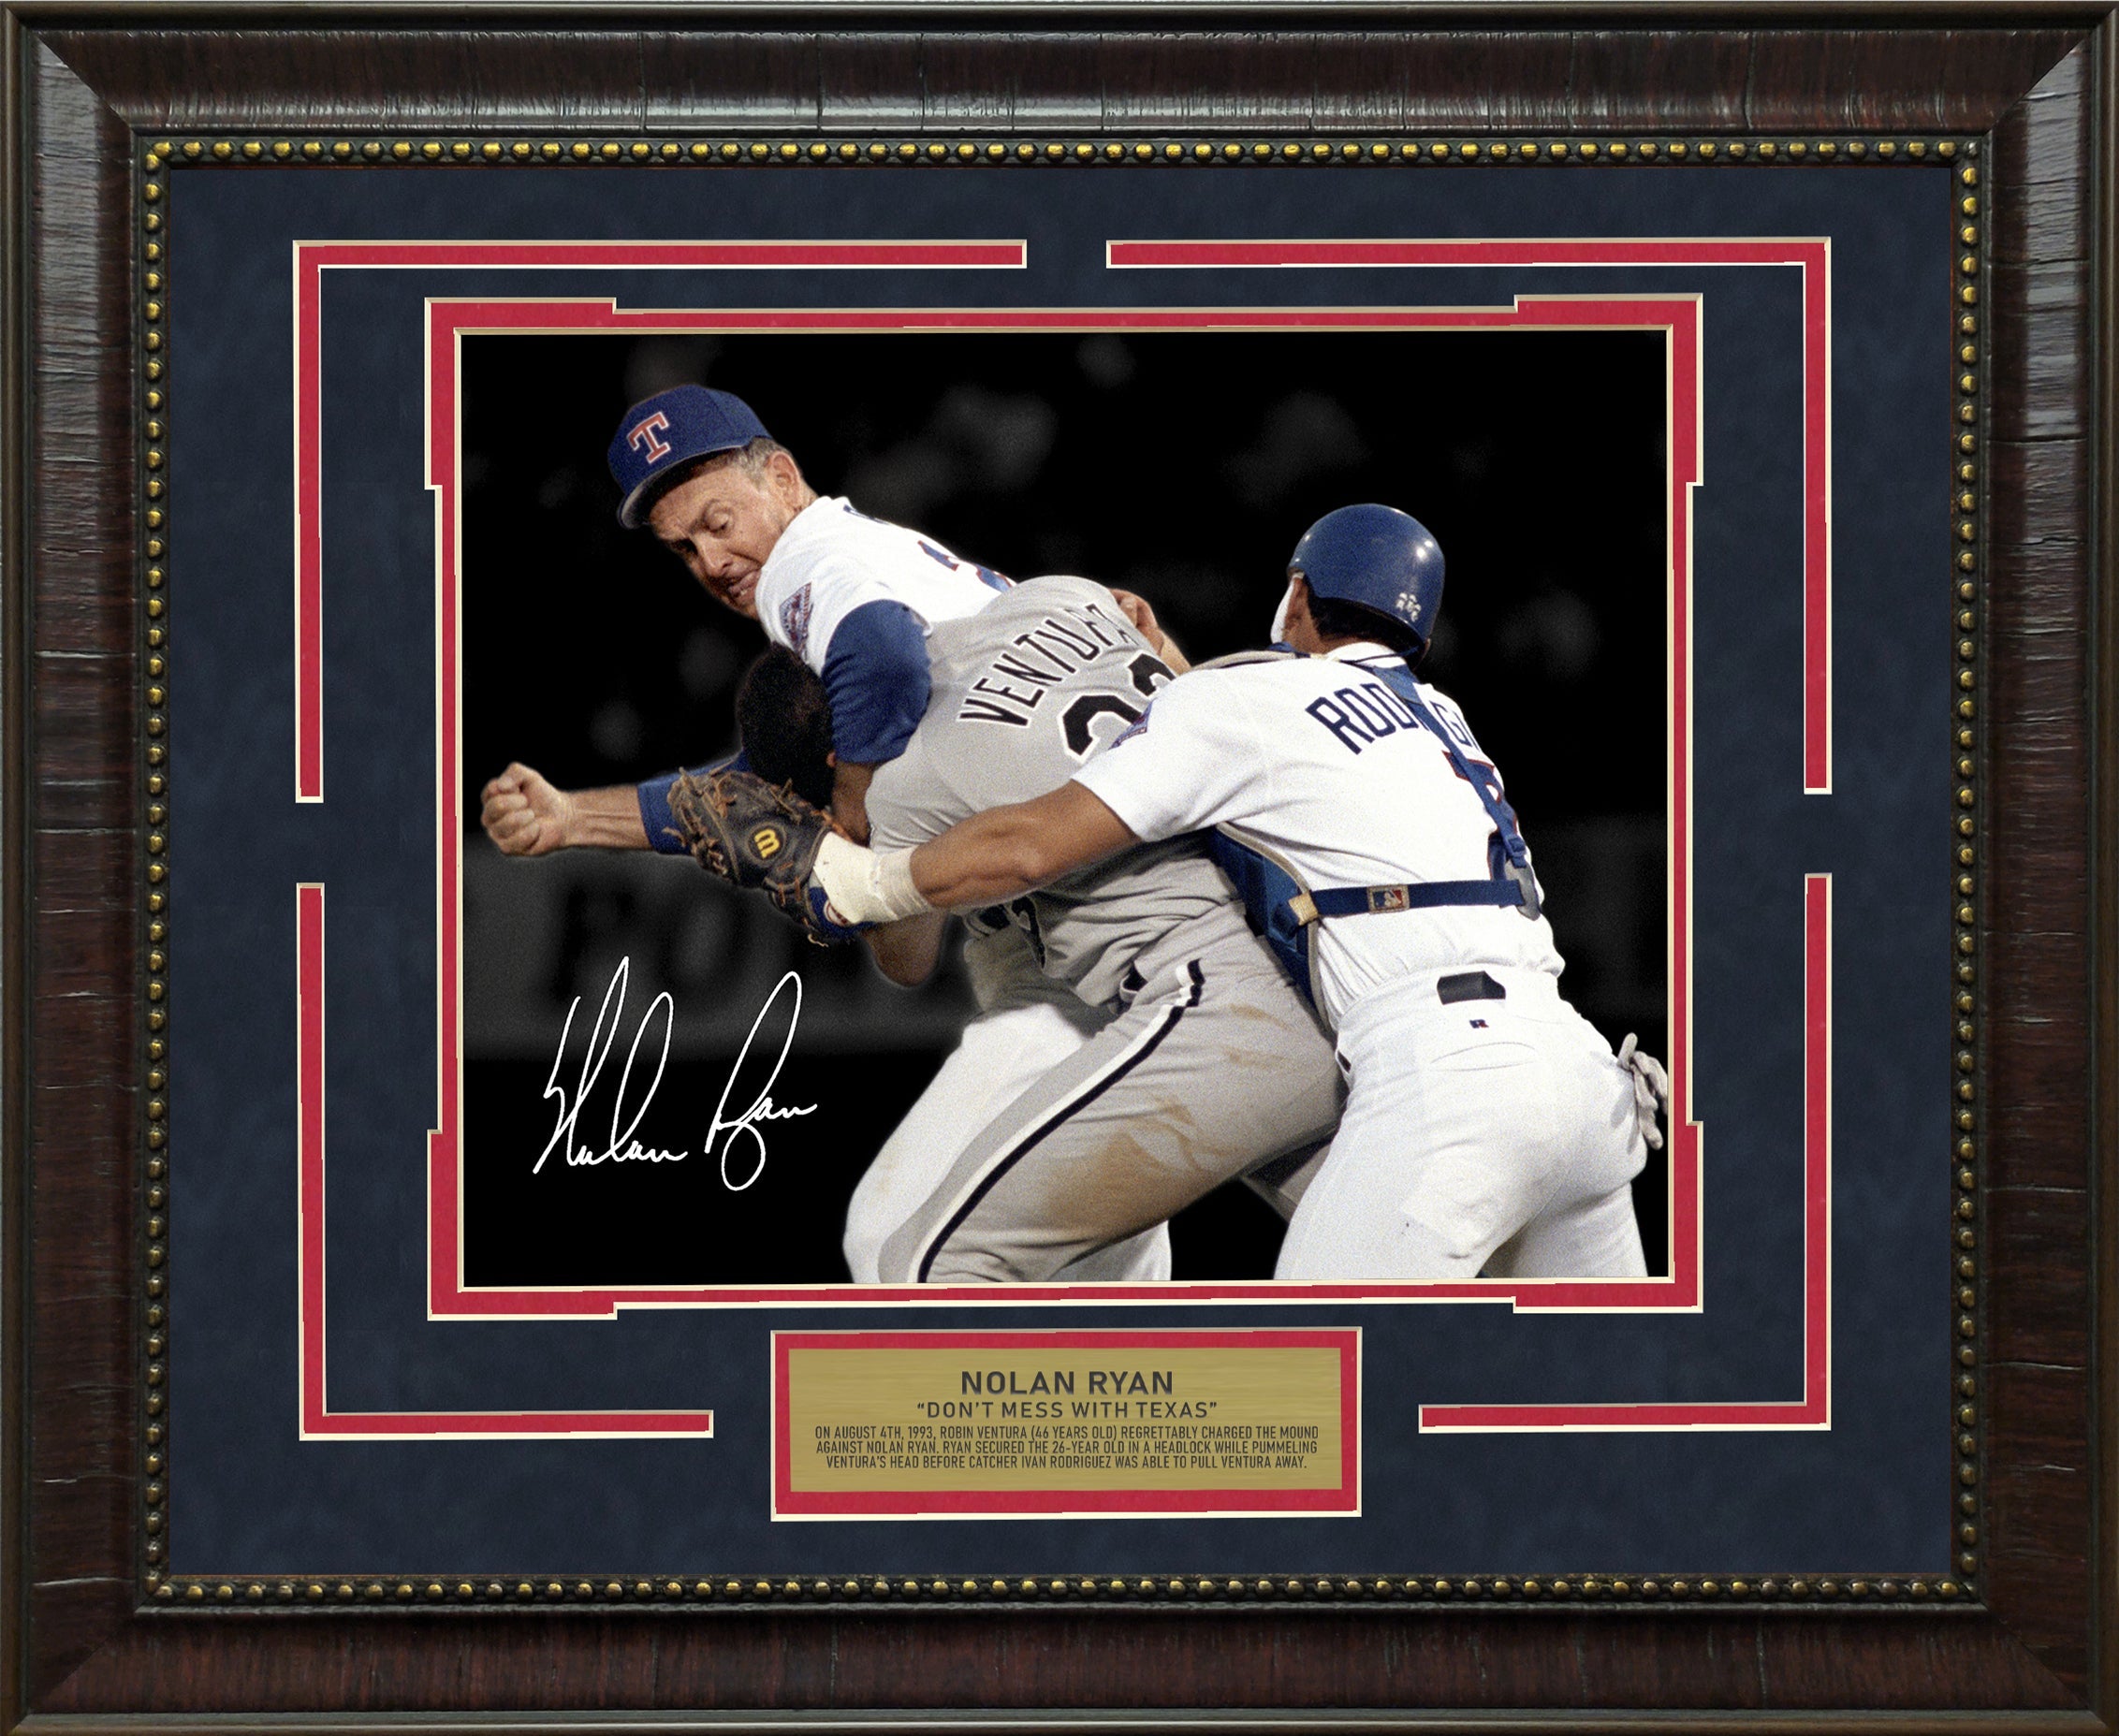 Nolan Ryan - Dont Mess With Texas with Facsimile Signature